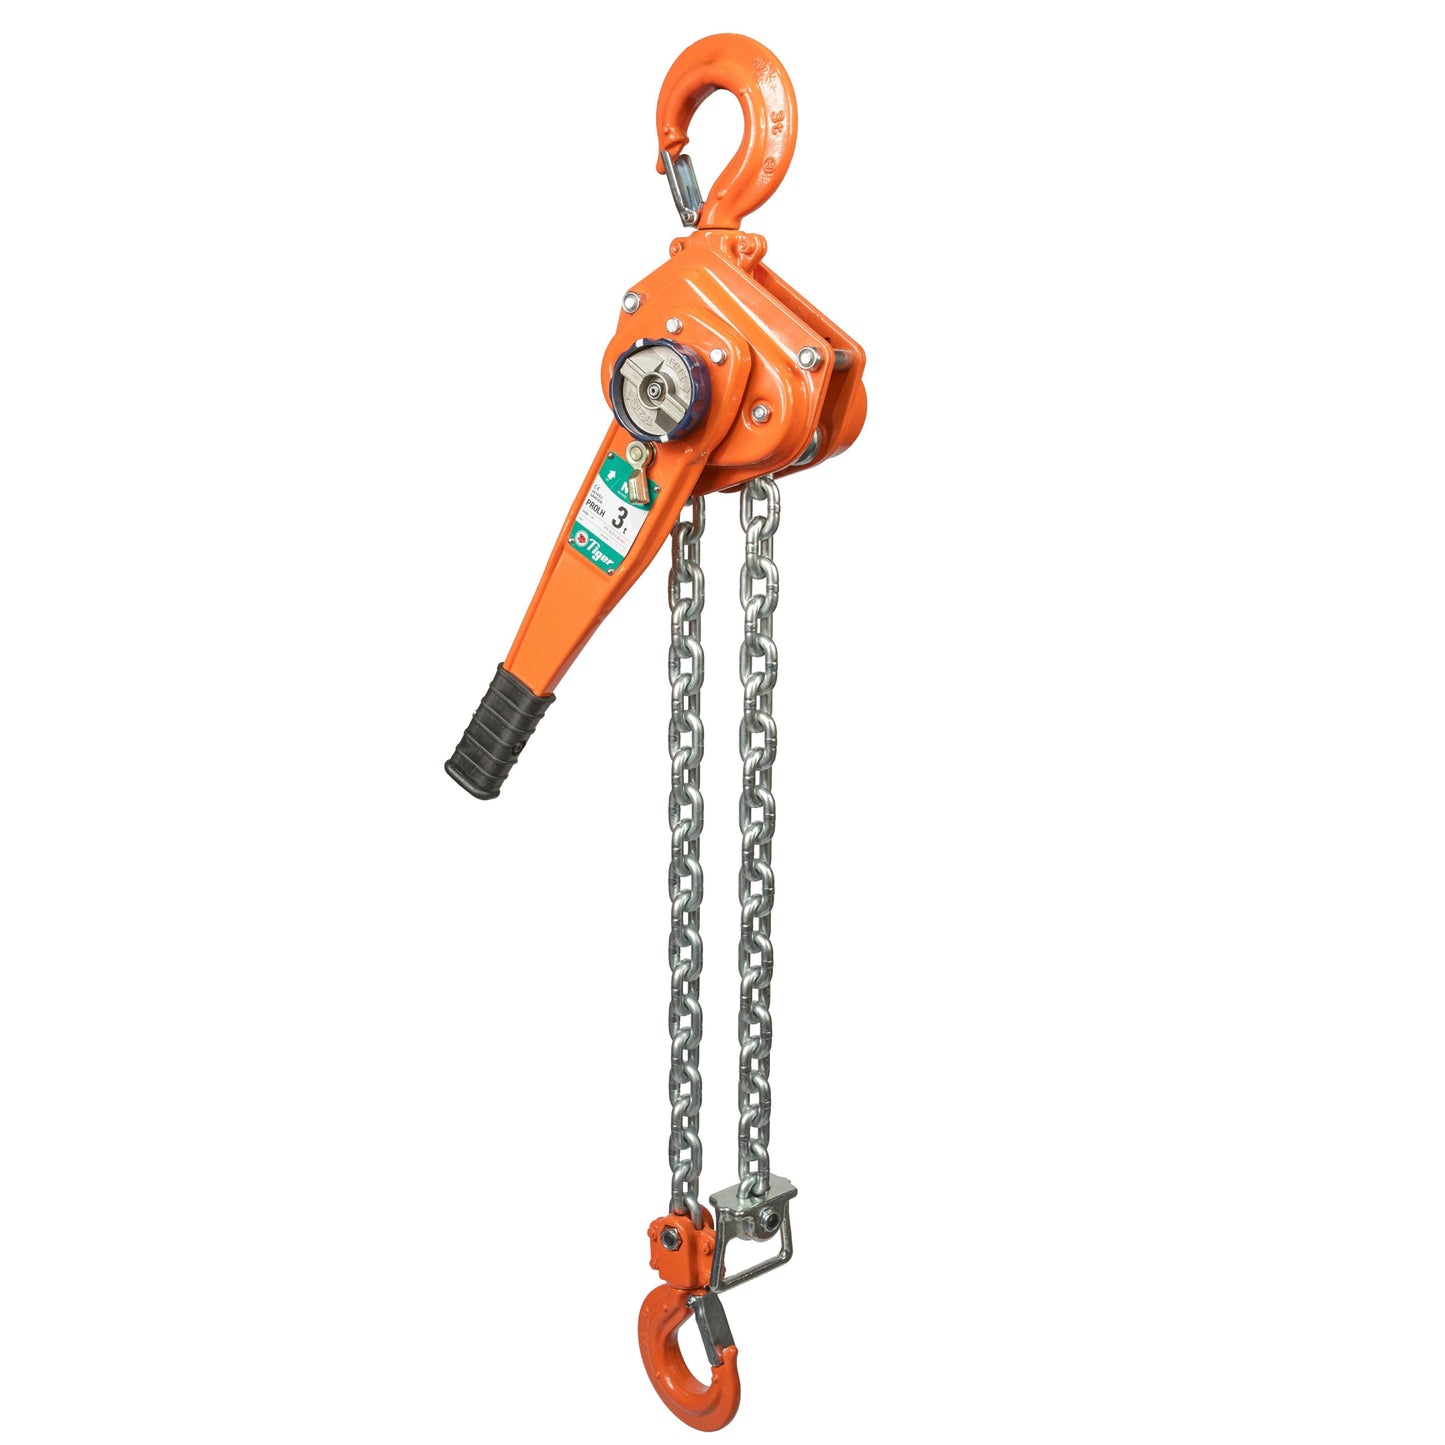 6.3t Tiger PROLH Professional Lever Hoist with Working Load Limiter